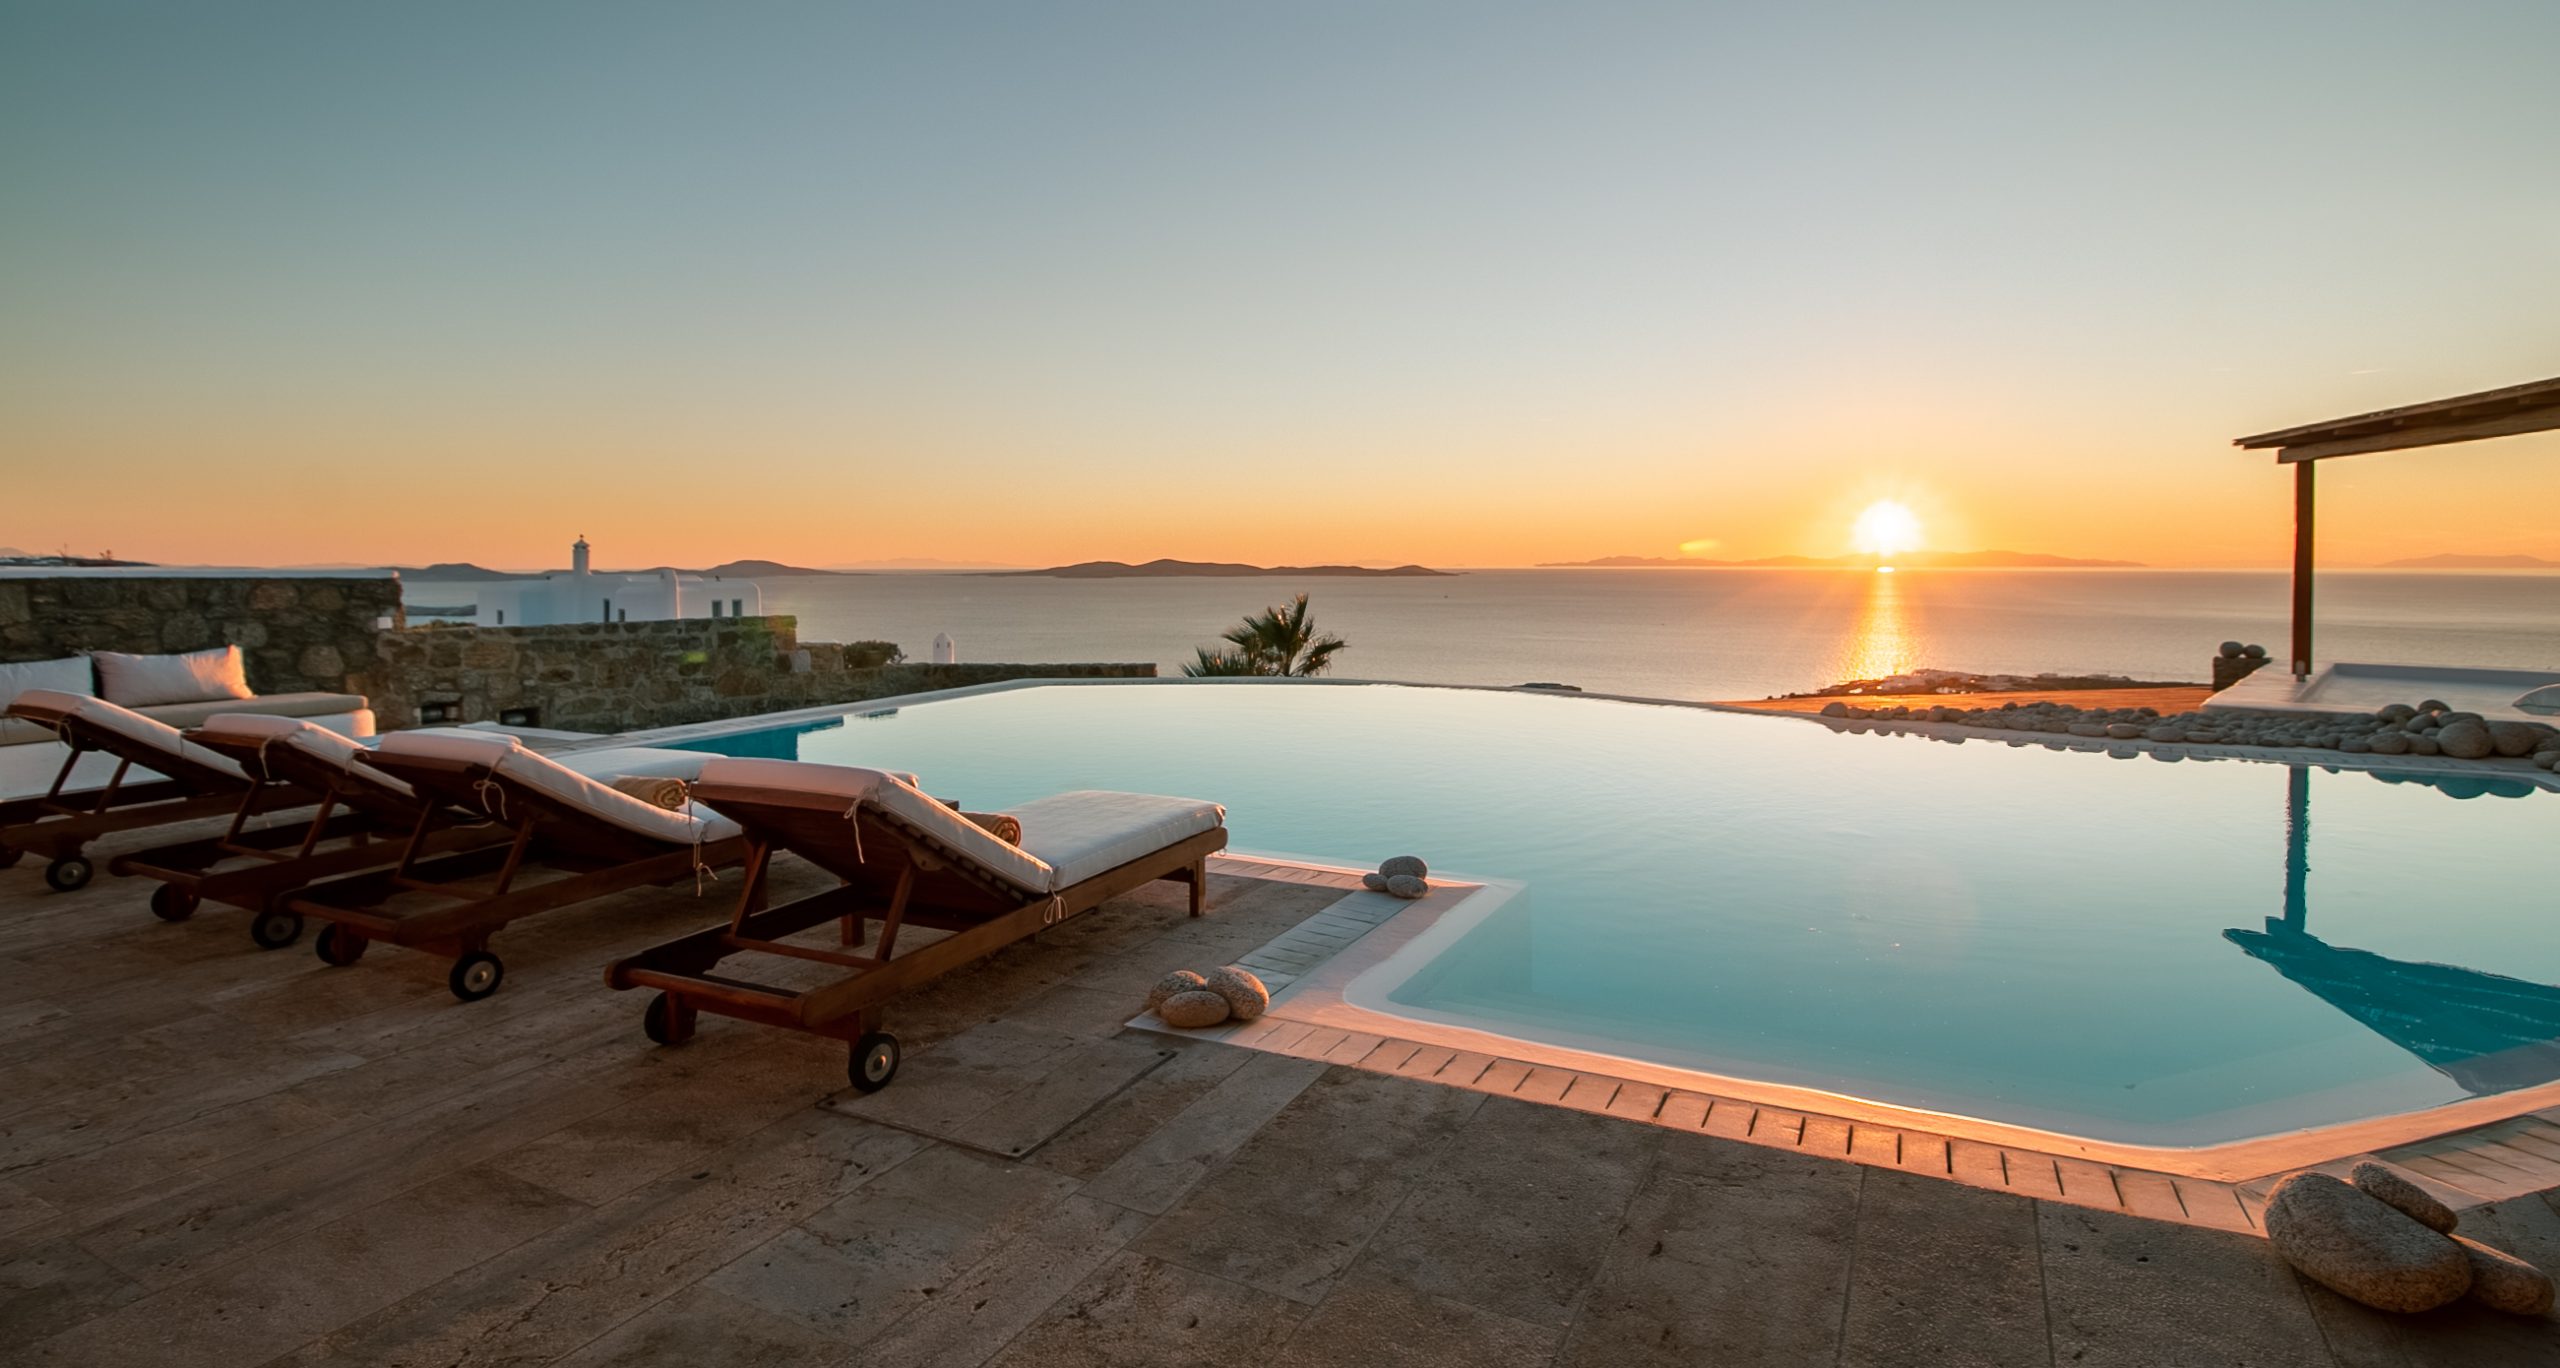 What are the pros of renting a private villa in Mykonos